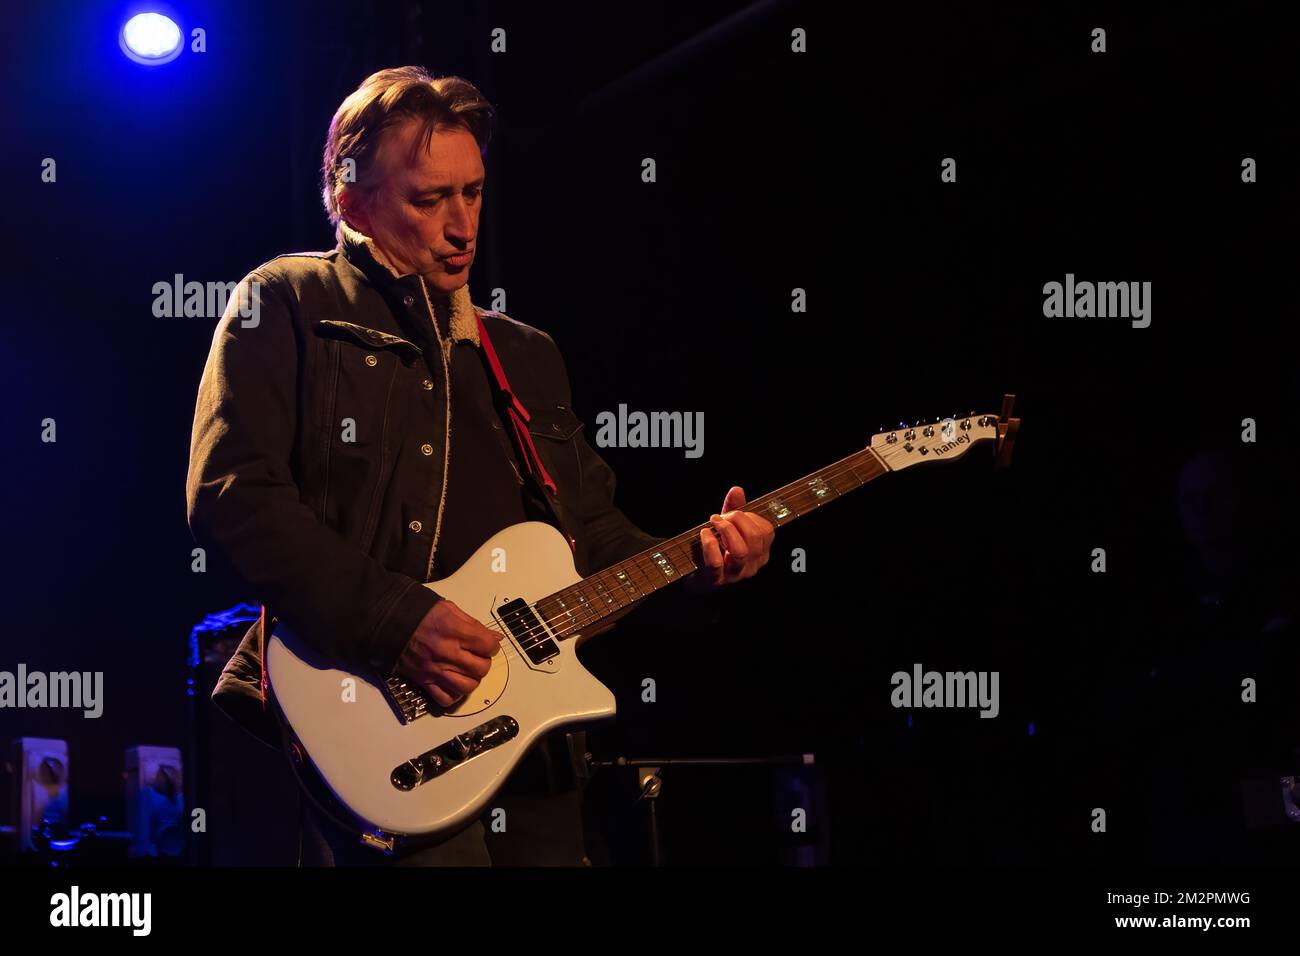 Oxford, United Kingdom. 12th, December 2022. The English rock band The Chameleons performs a live concert at the O2 Academy Oxford in Oxford. Here guitarist Reg Smithies is seen live on stage. (Photo credit: Gonzales Photo – Per-Otto Oppi). Stock Photo